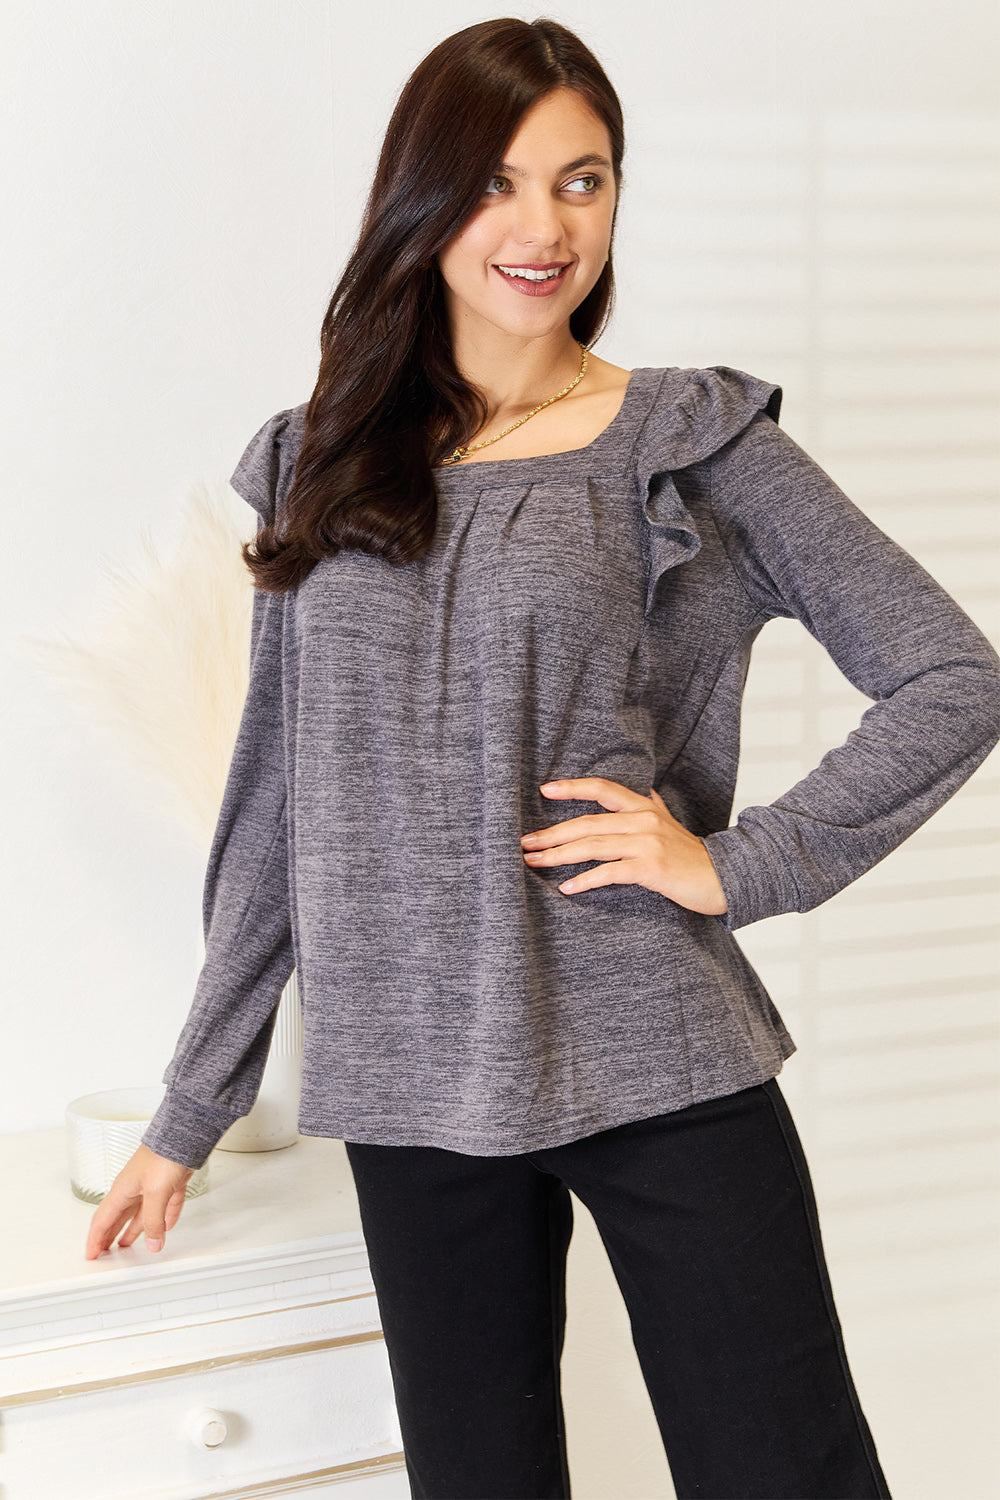 Long Sleeve Ruffled Top - Inspired Eye Boutique